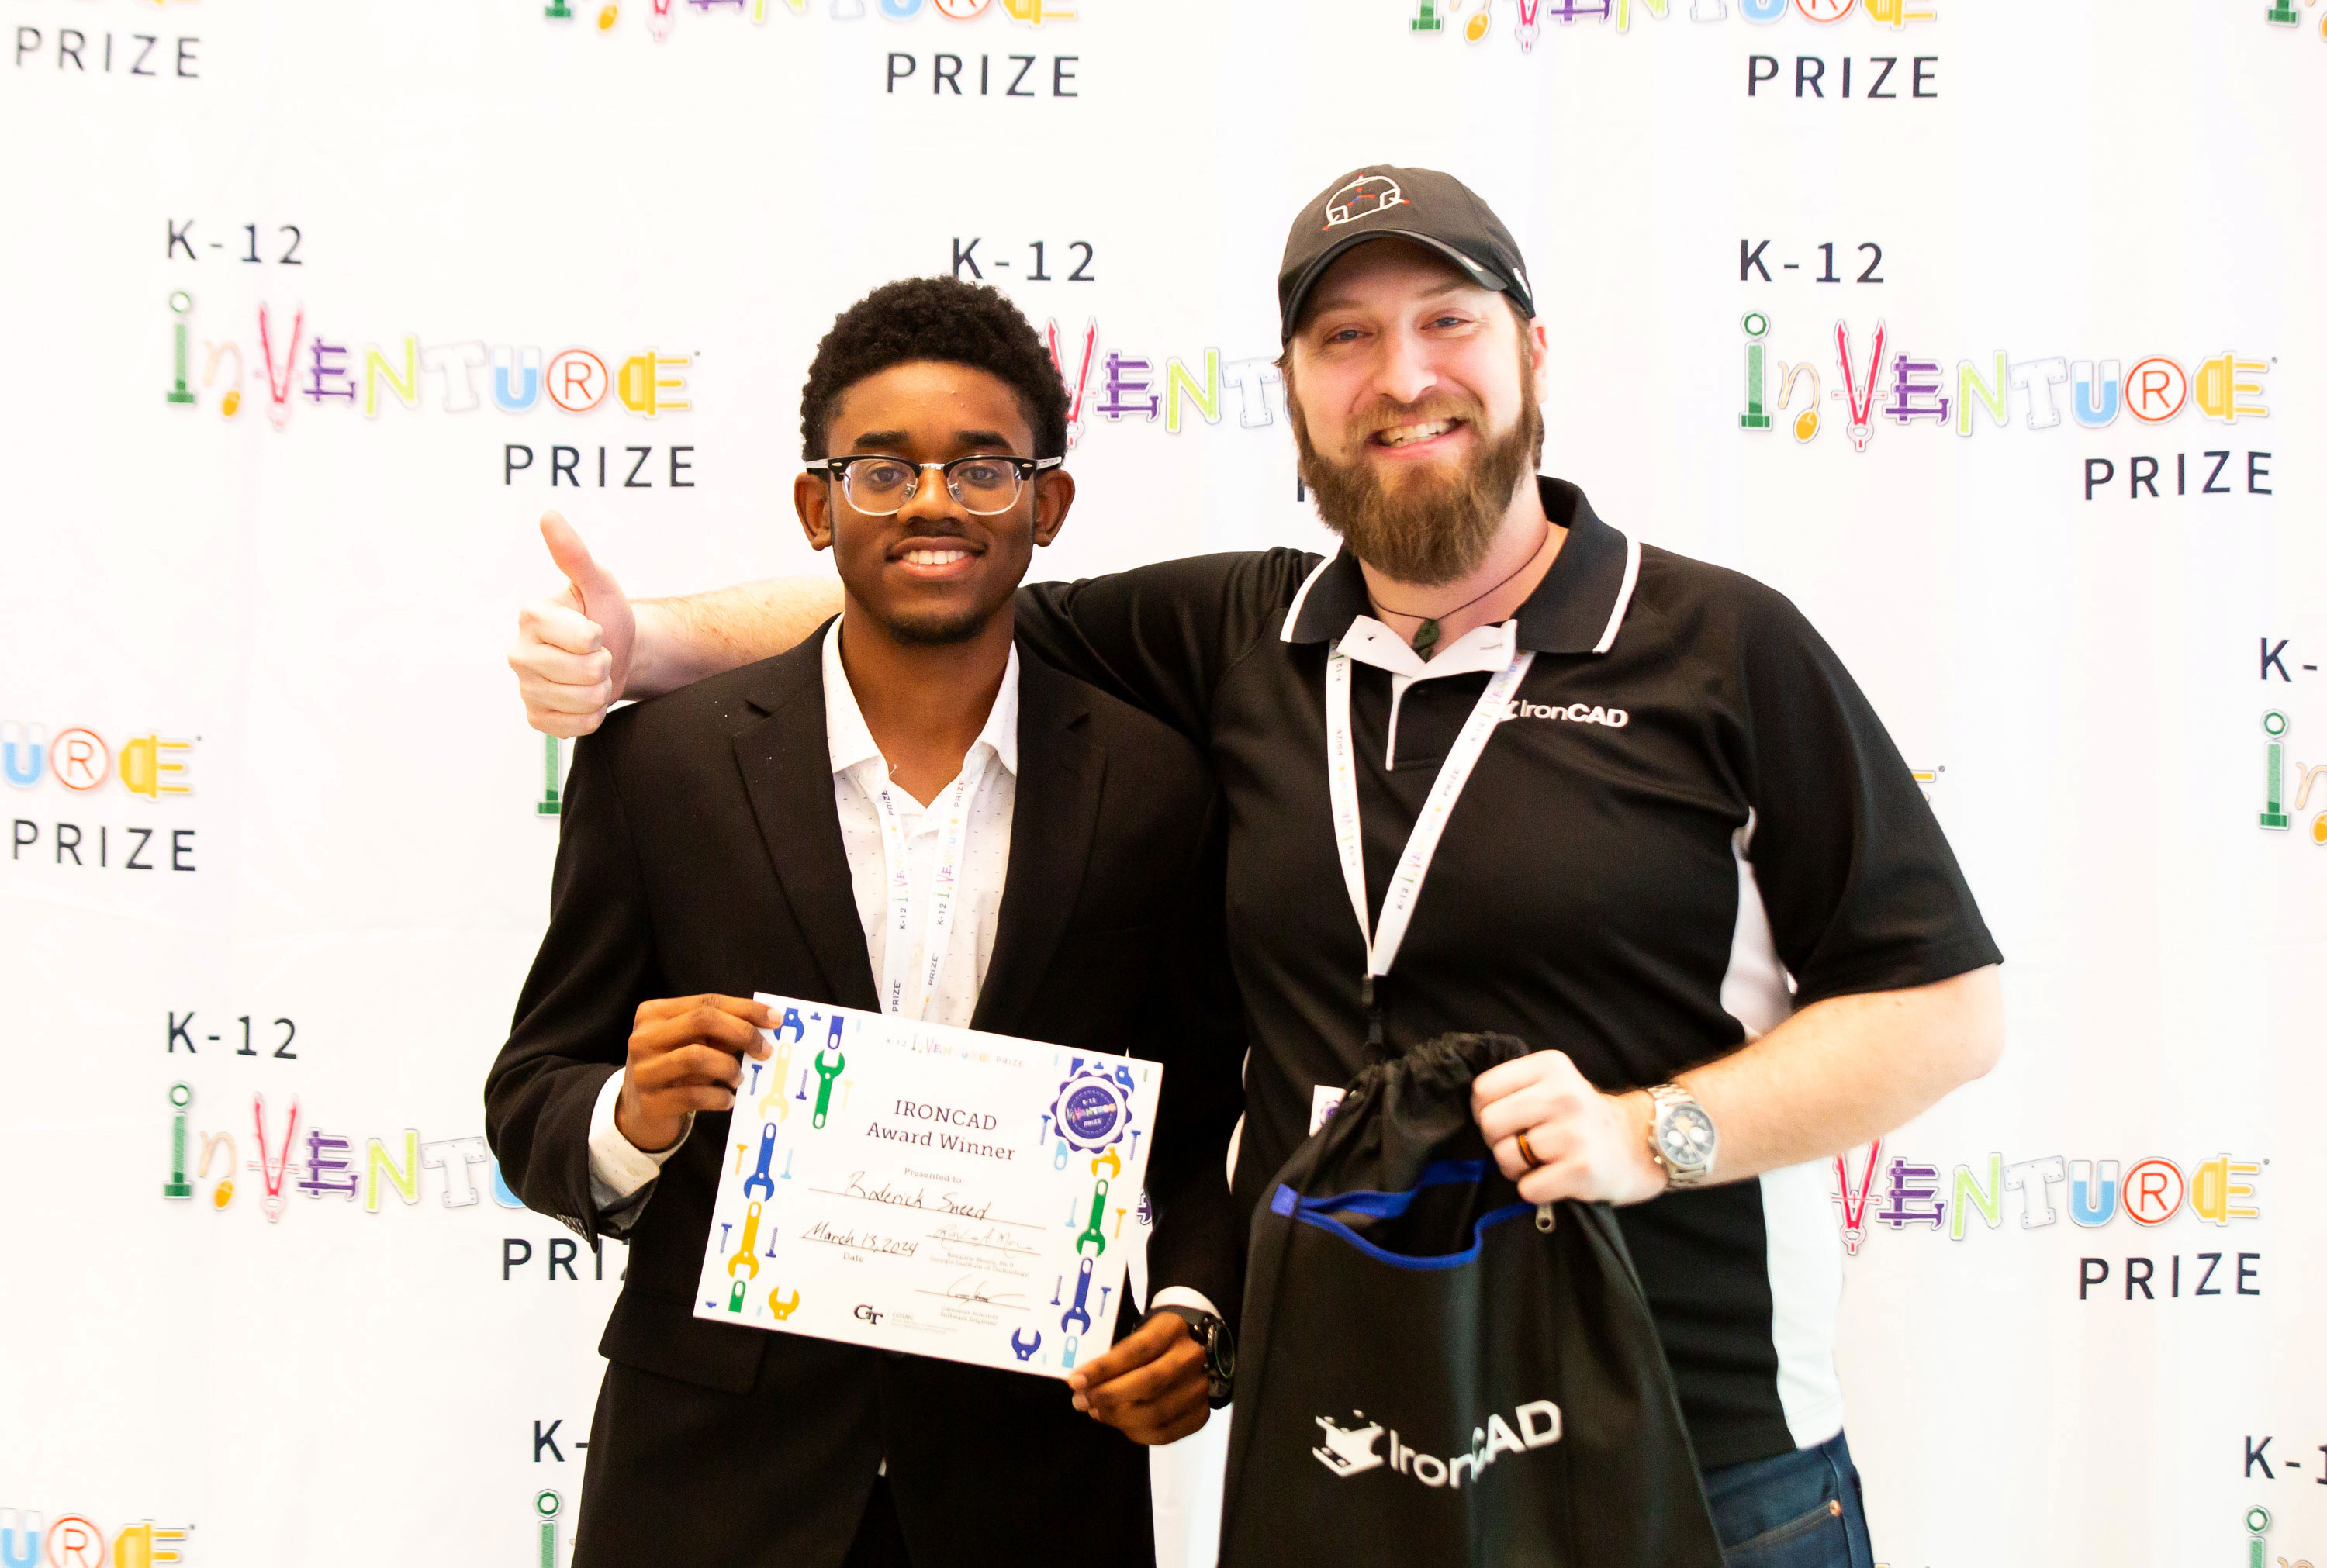 A smiling student holding a certificate next to a smiling IronCAD representative